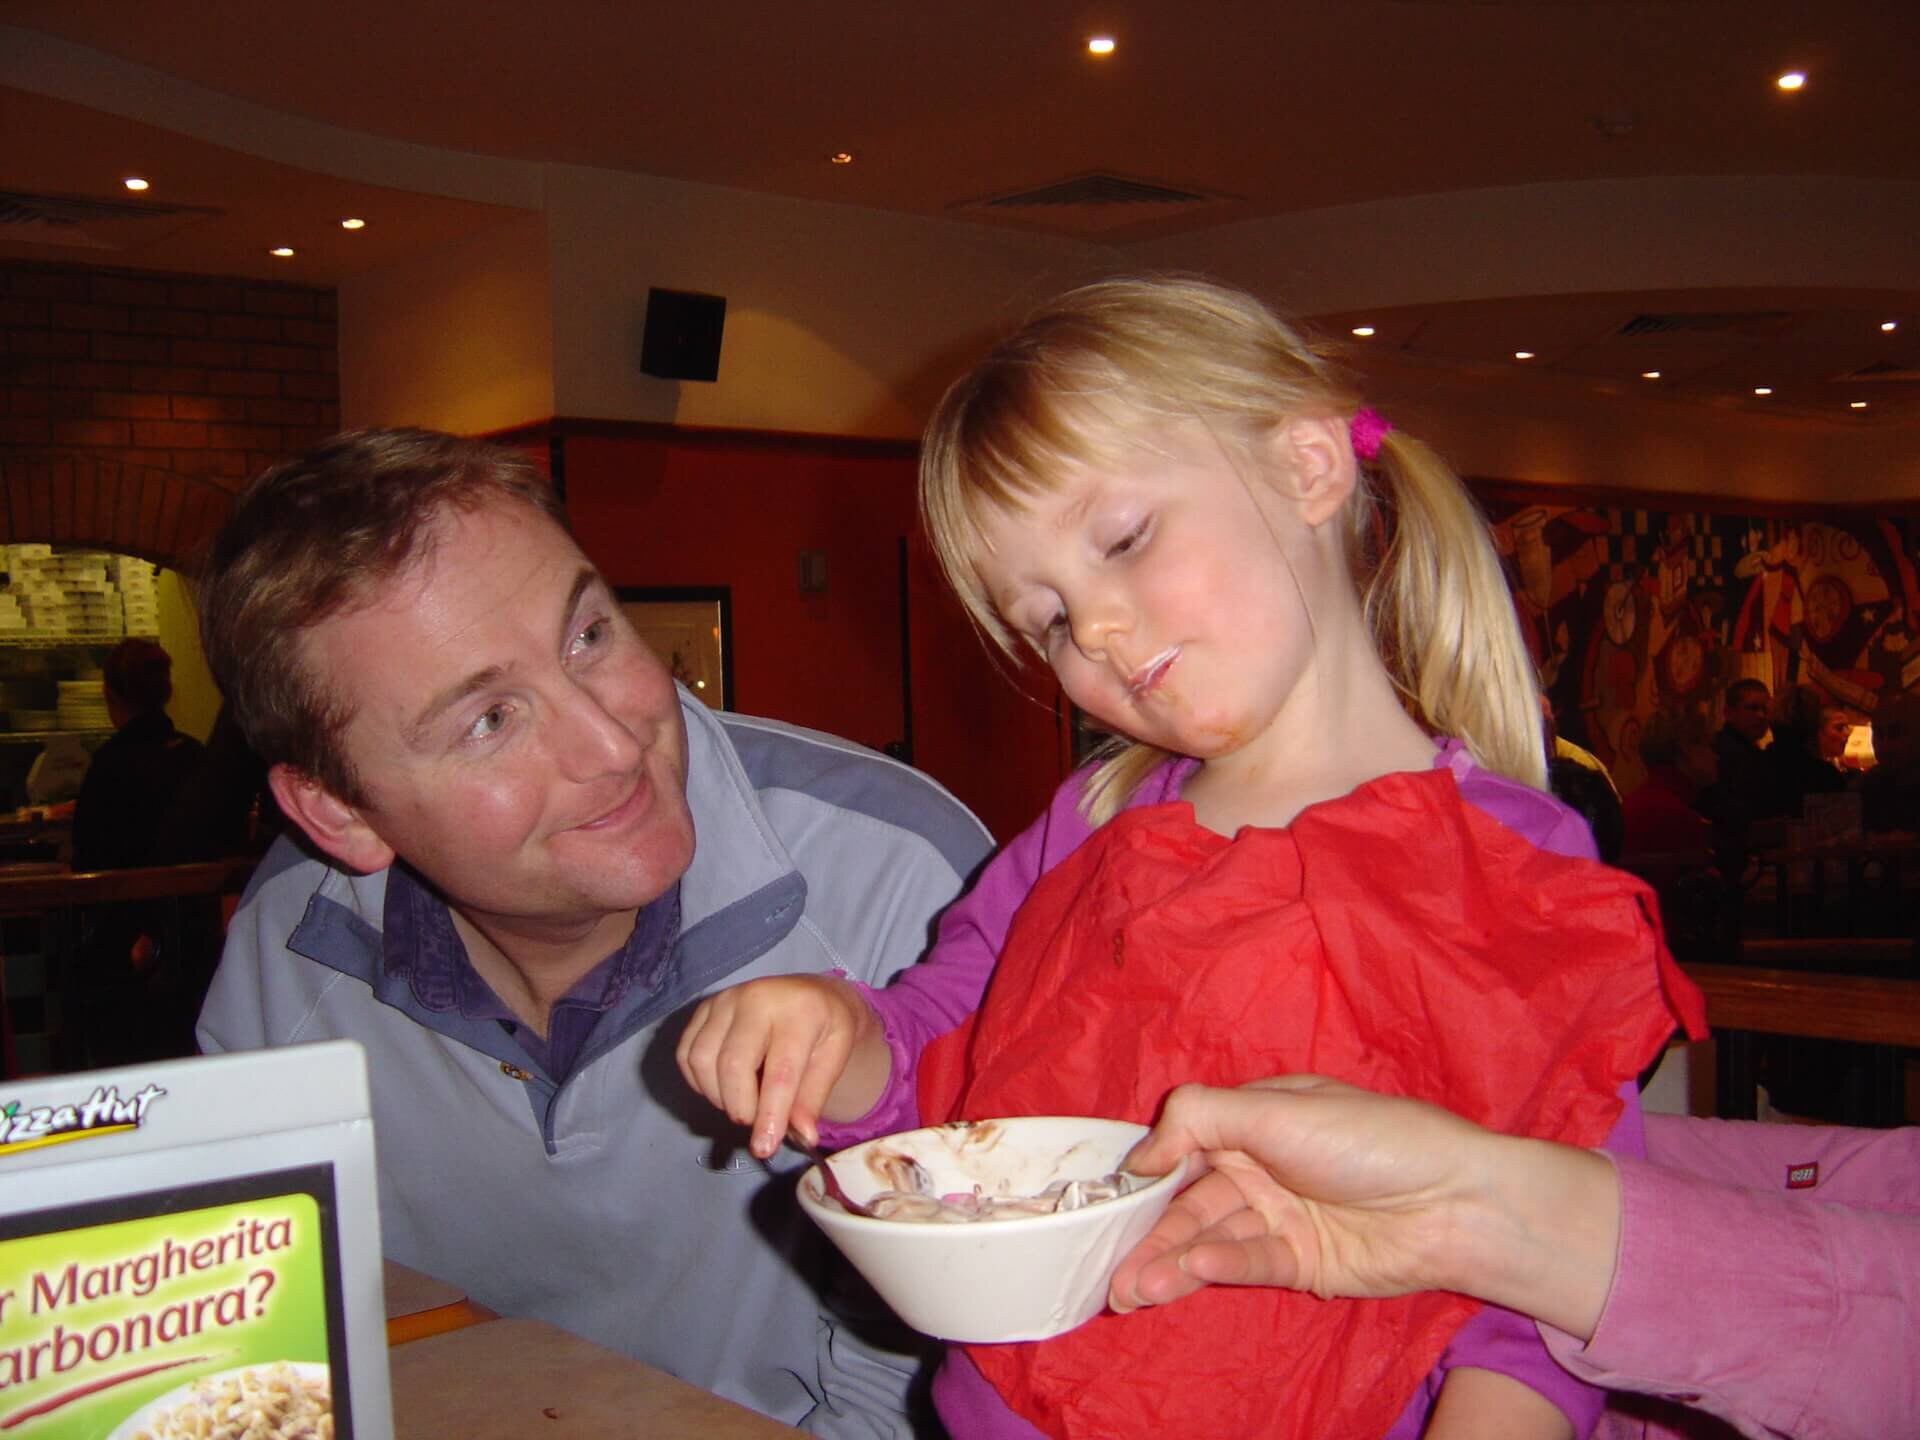 Young Emily eats from a bowl with her father.